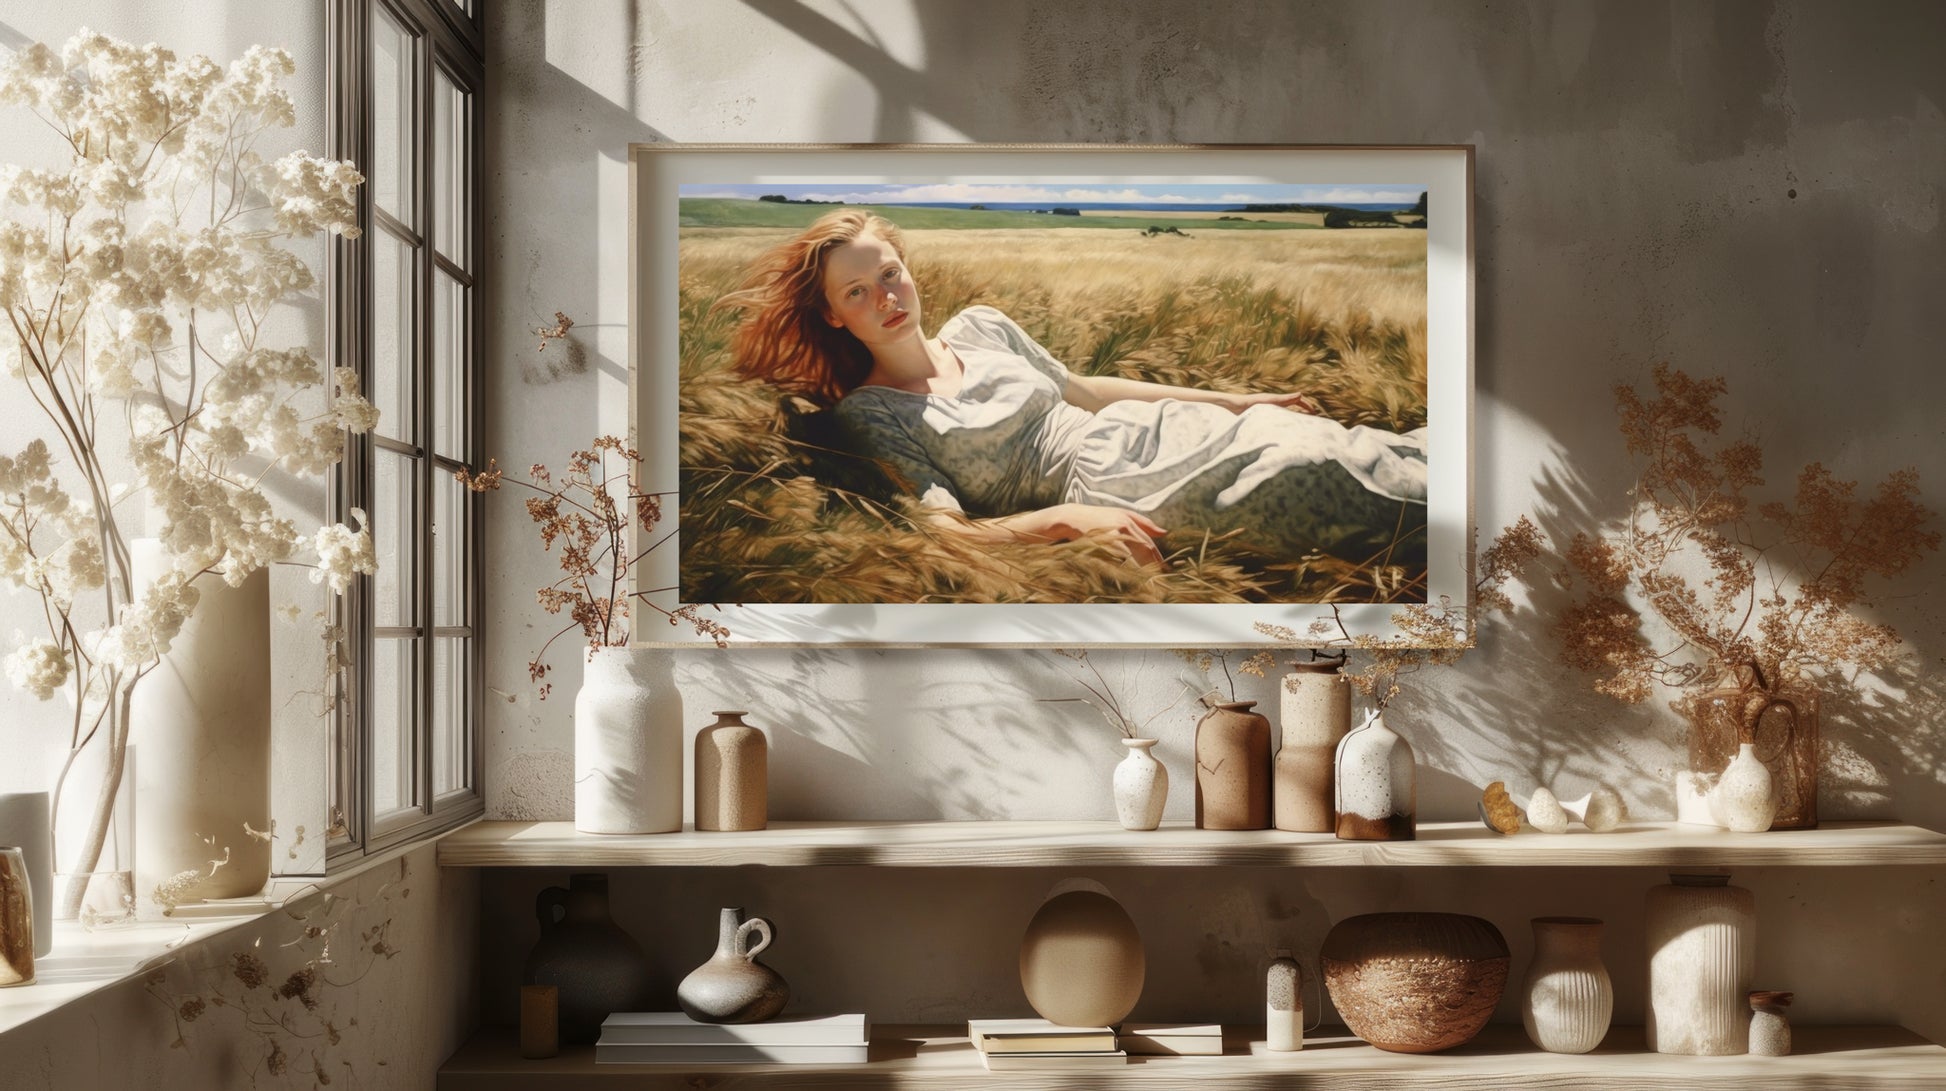 Artwork print showing a woman relaxing in a wheat field, part of the Down East Maine collection.